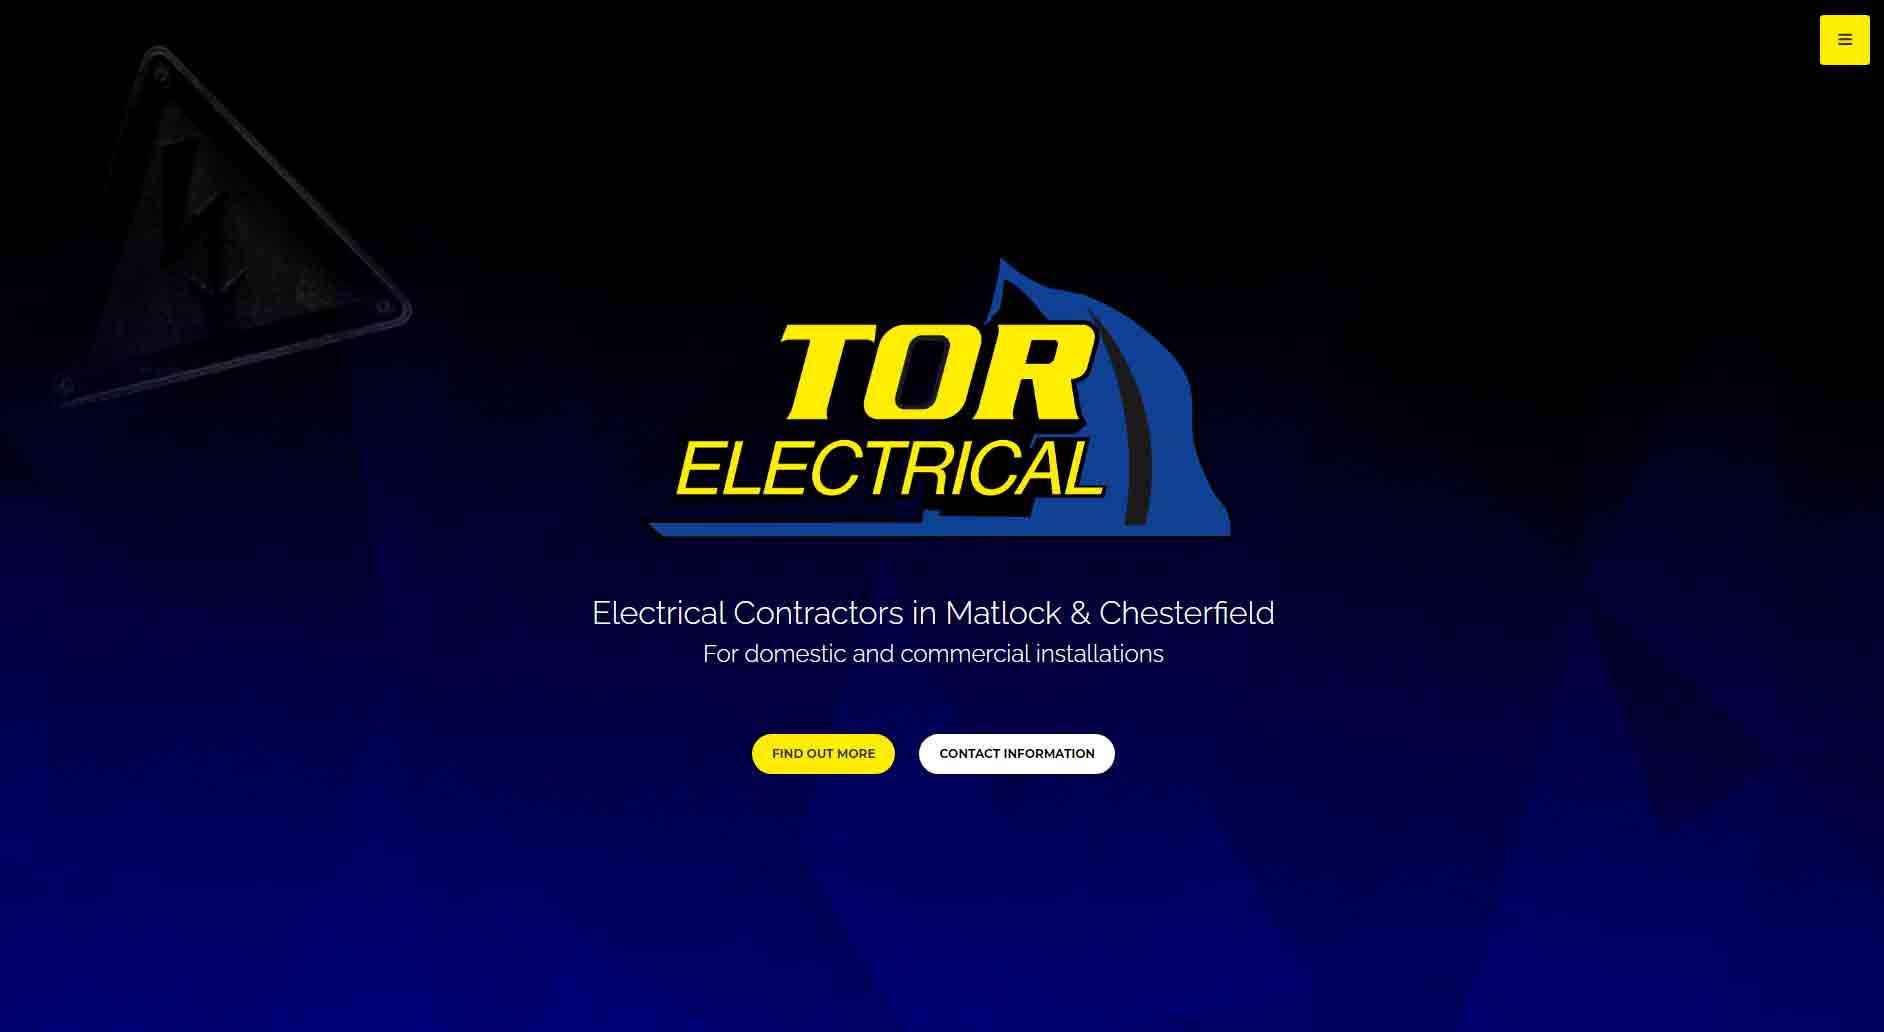 Tor Electrical - by Cecil Web Designs